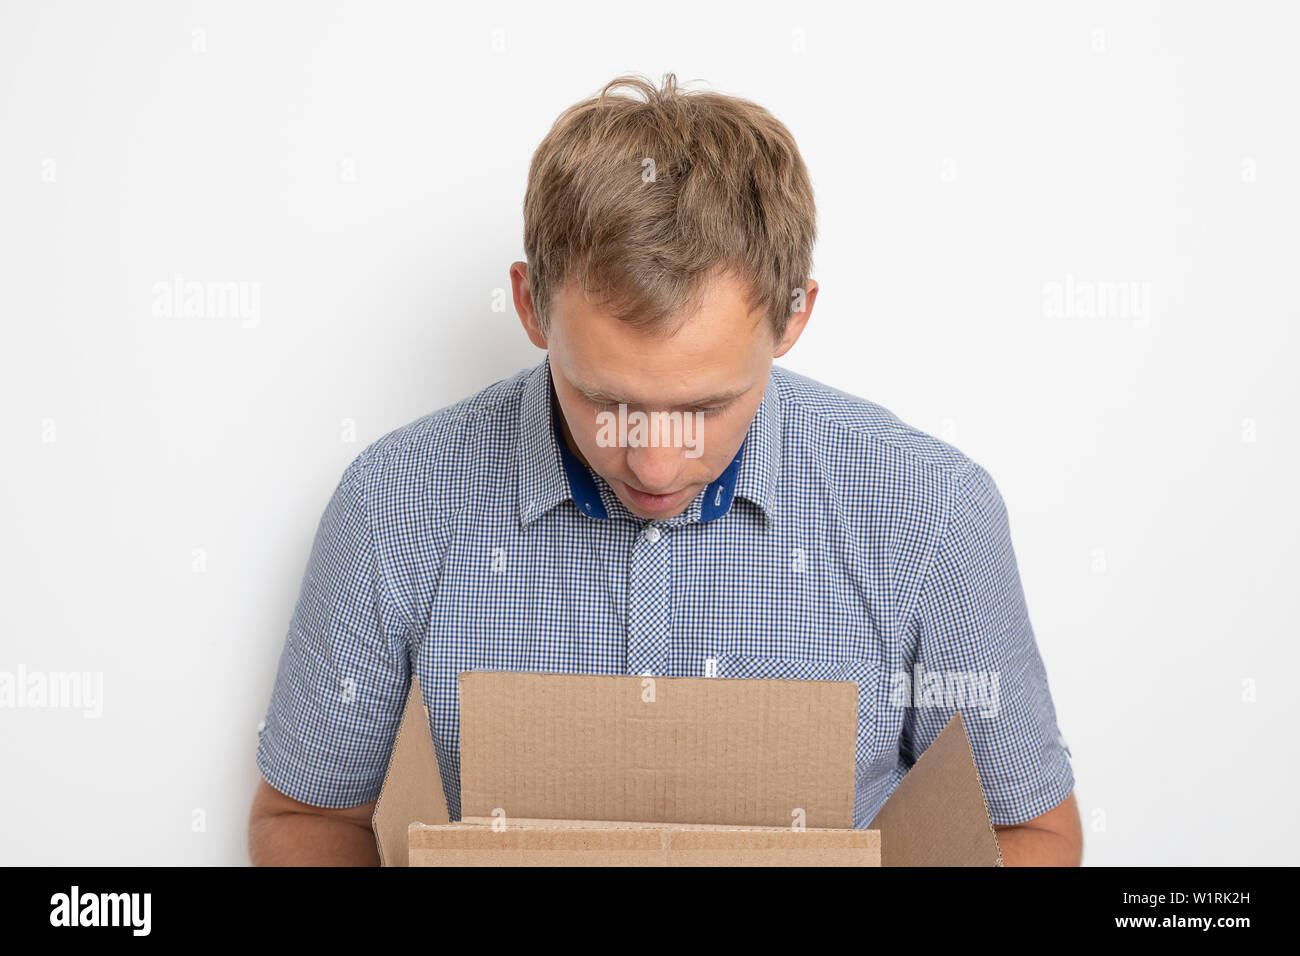 Description: curious man looking inside a cardboard box he holds in his hands on a white background Stock Photo